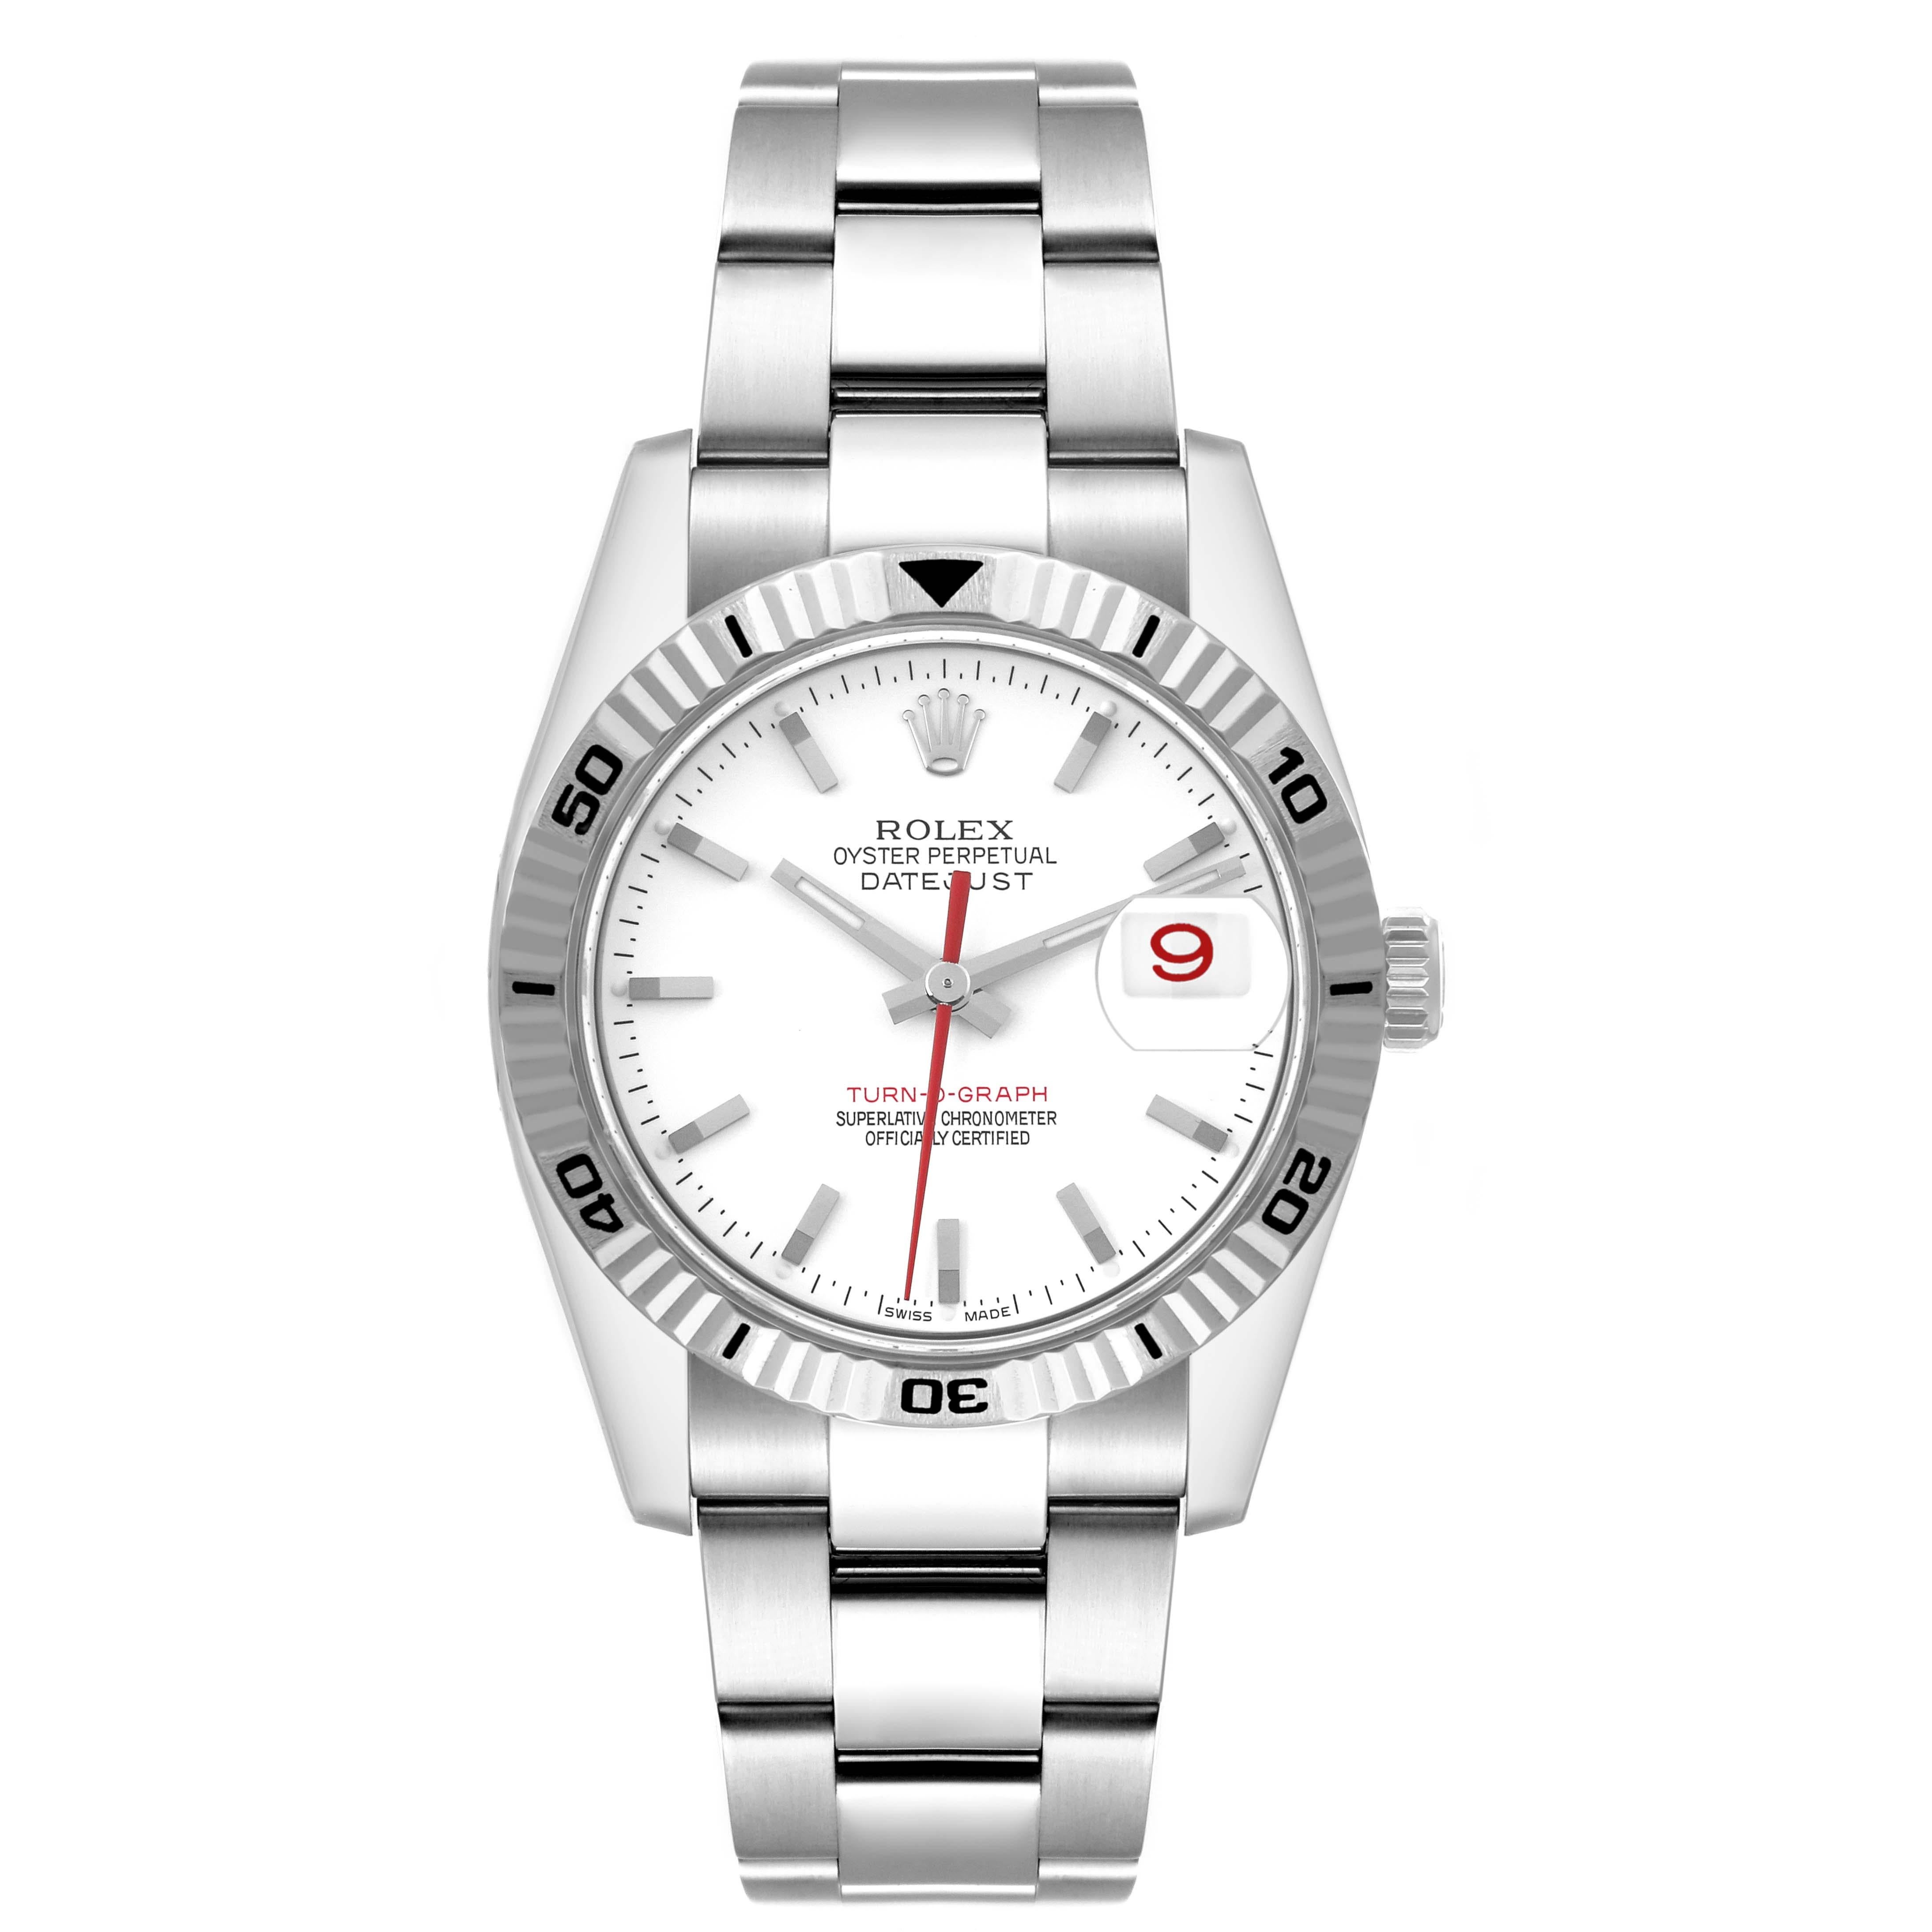 Rolex Datejust Turnograph White Dial Steel Mens Watch 116264. Officially certified chronometer self-winding movement. Stainless steel case 36.0 mm in diameter. Rolex logo on the crown. 18k white gold fluted bidirectional rotating turnograph bezel.